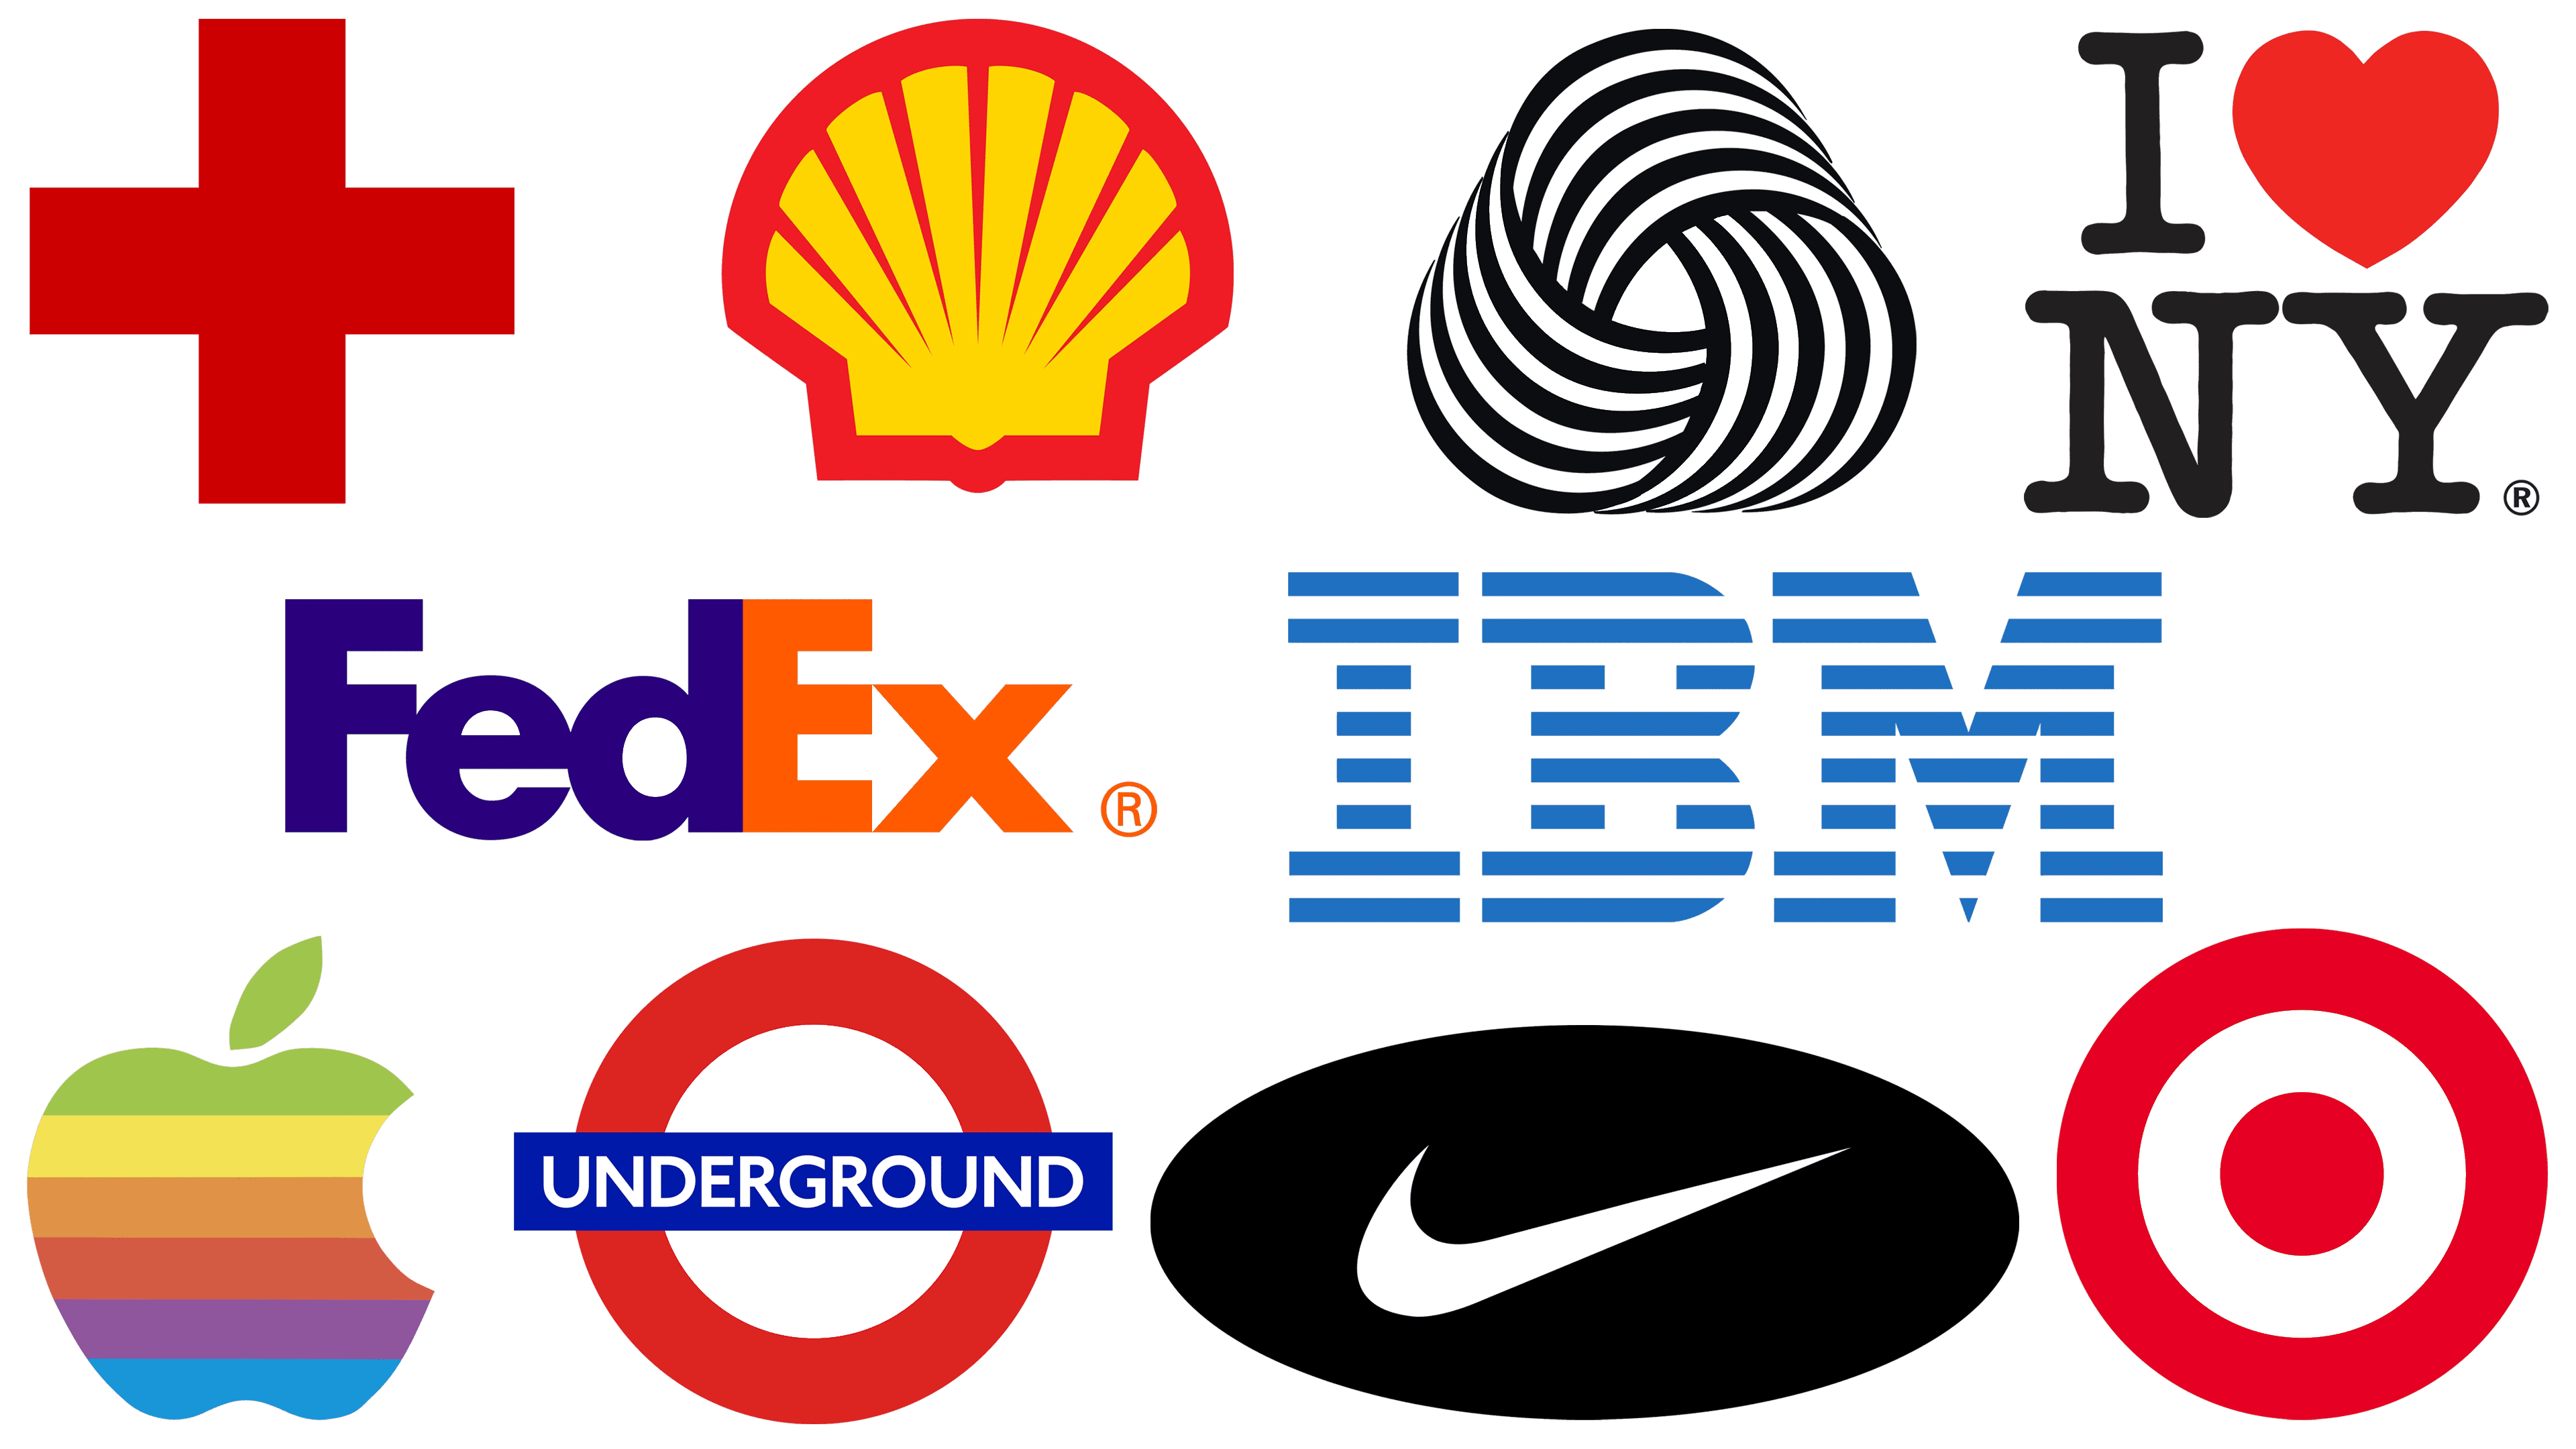 Top 101 most famous logos of all time ranked and what you can